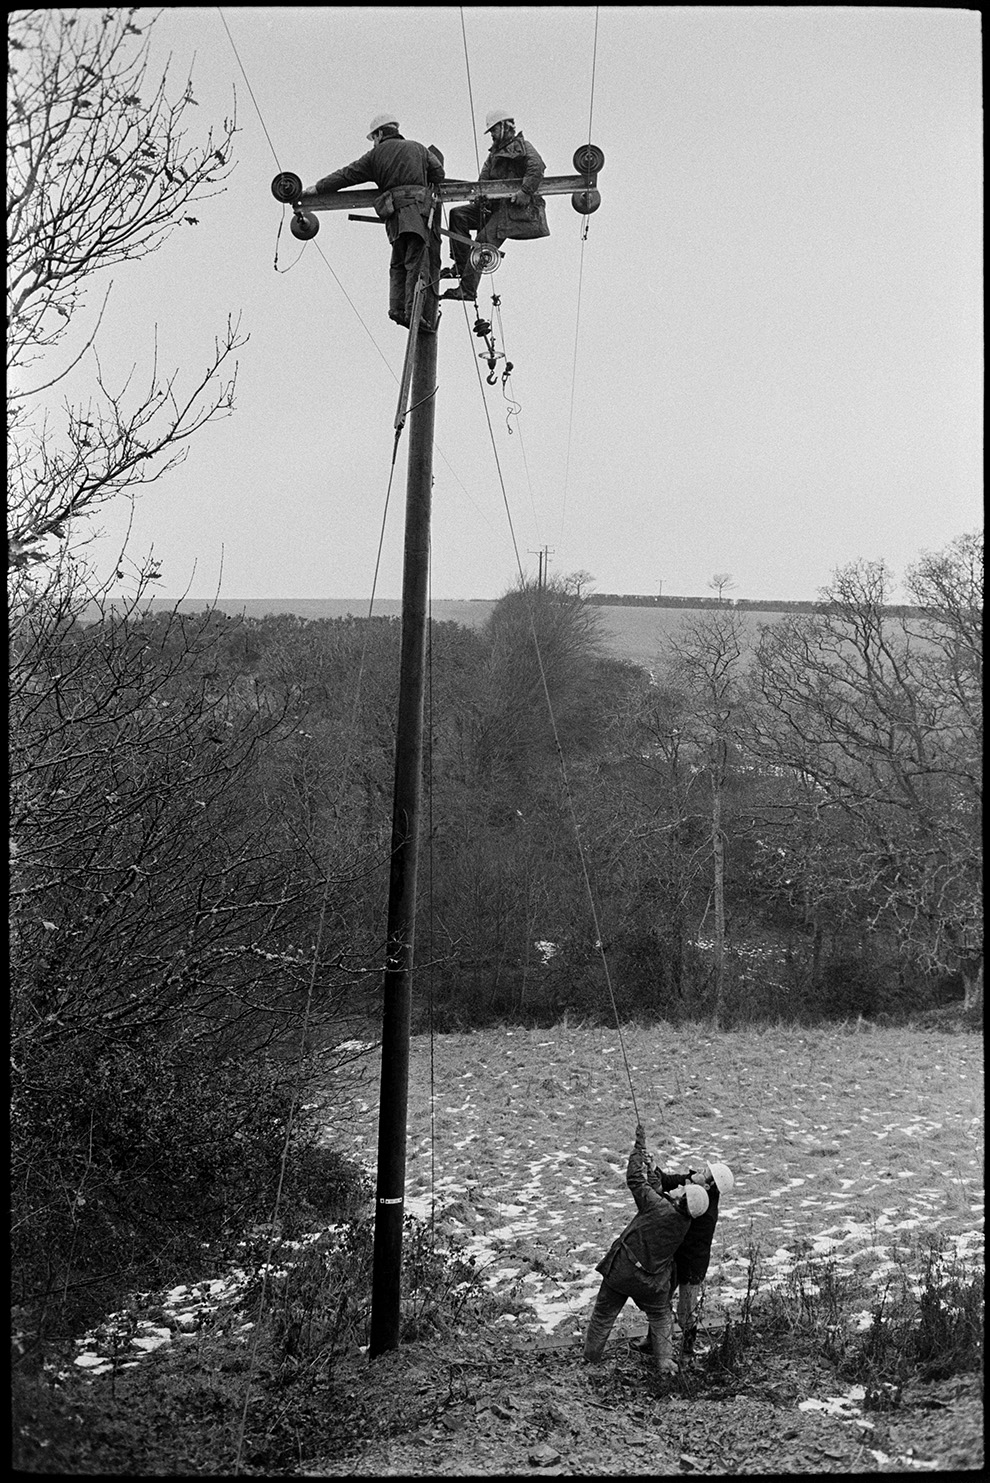 Electricity Board engineers putting up new power cables to village, Dolton,  2 January 1979.